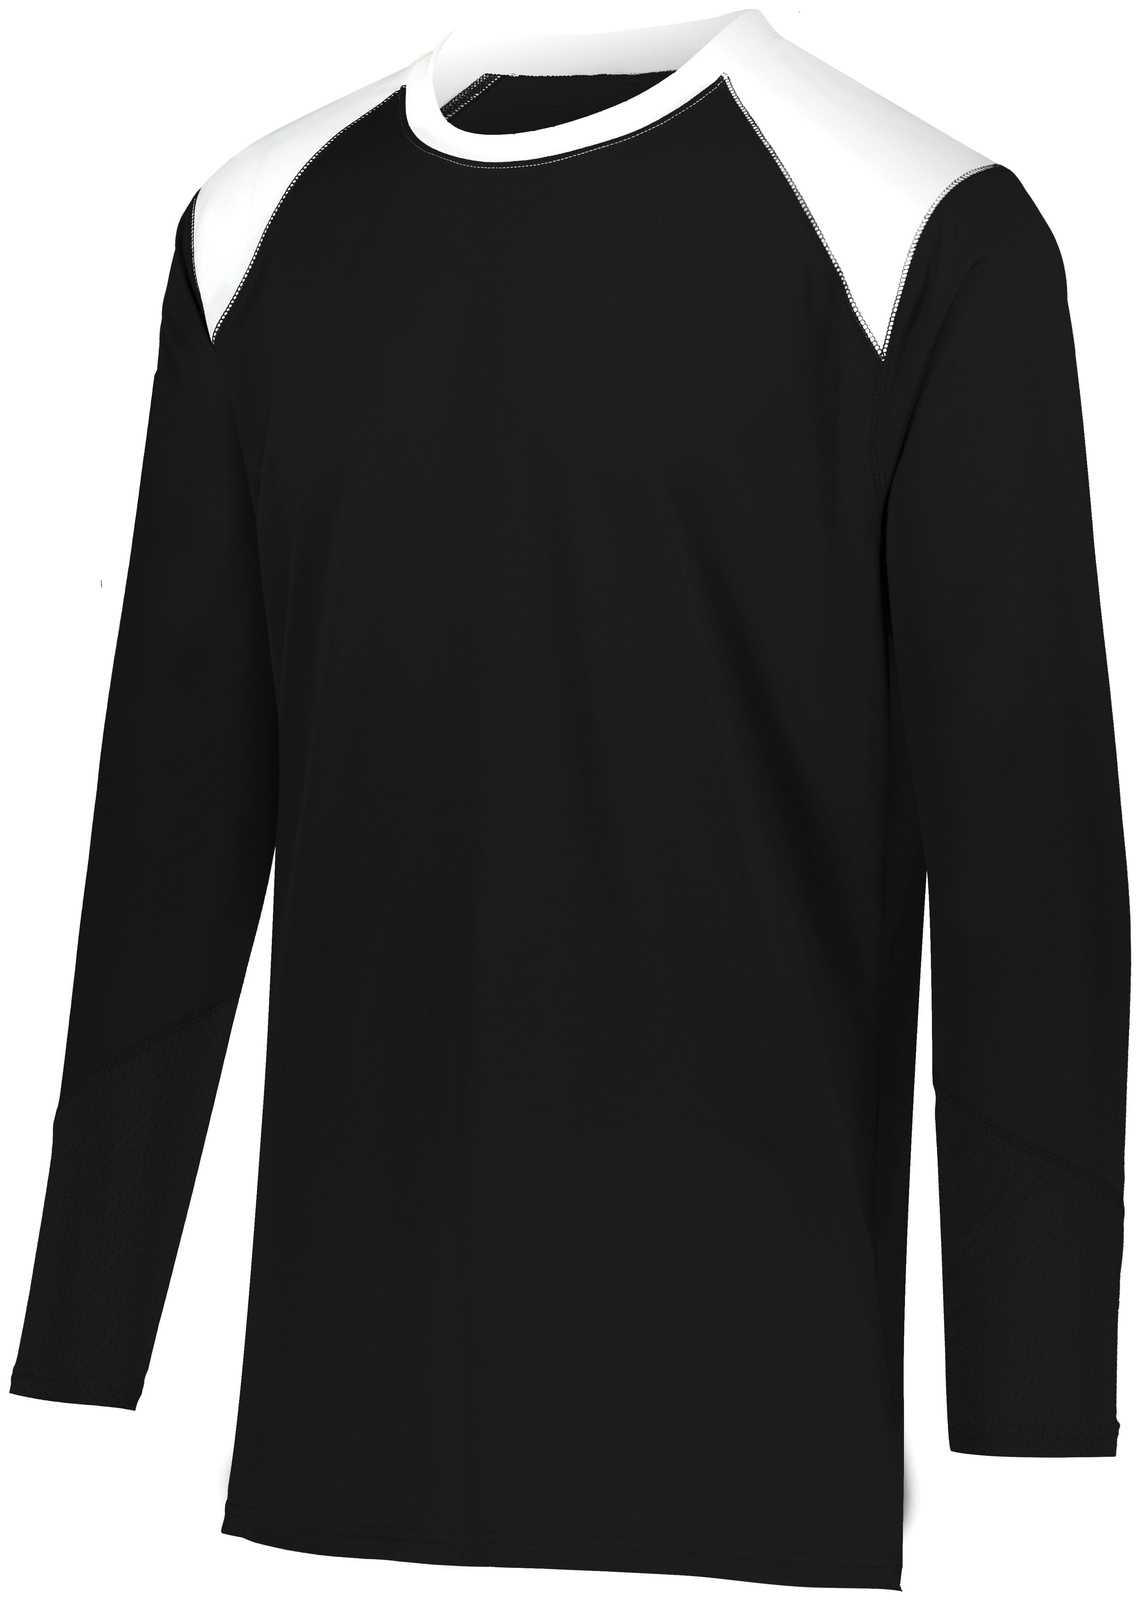 Augusta 1728 Tip-Off Shooter Shirt - Black White - HIT a Double